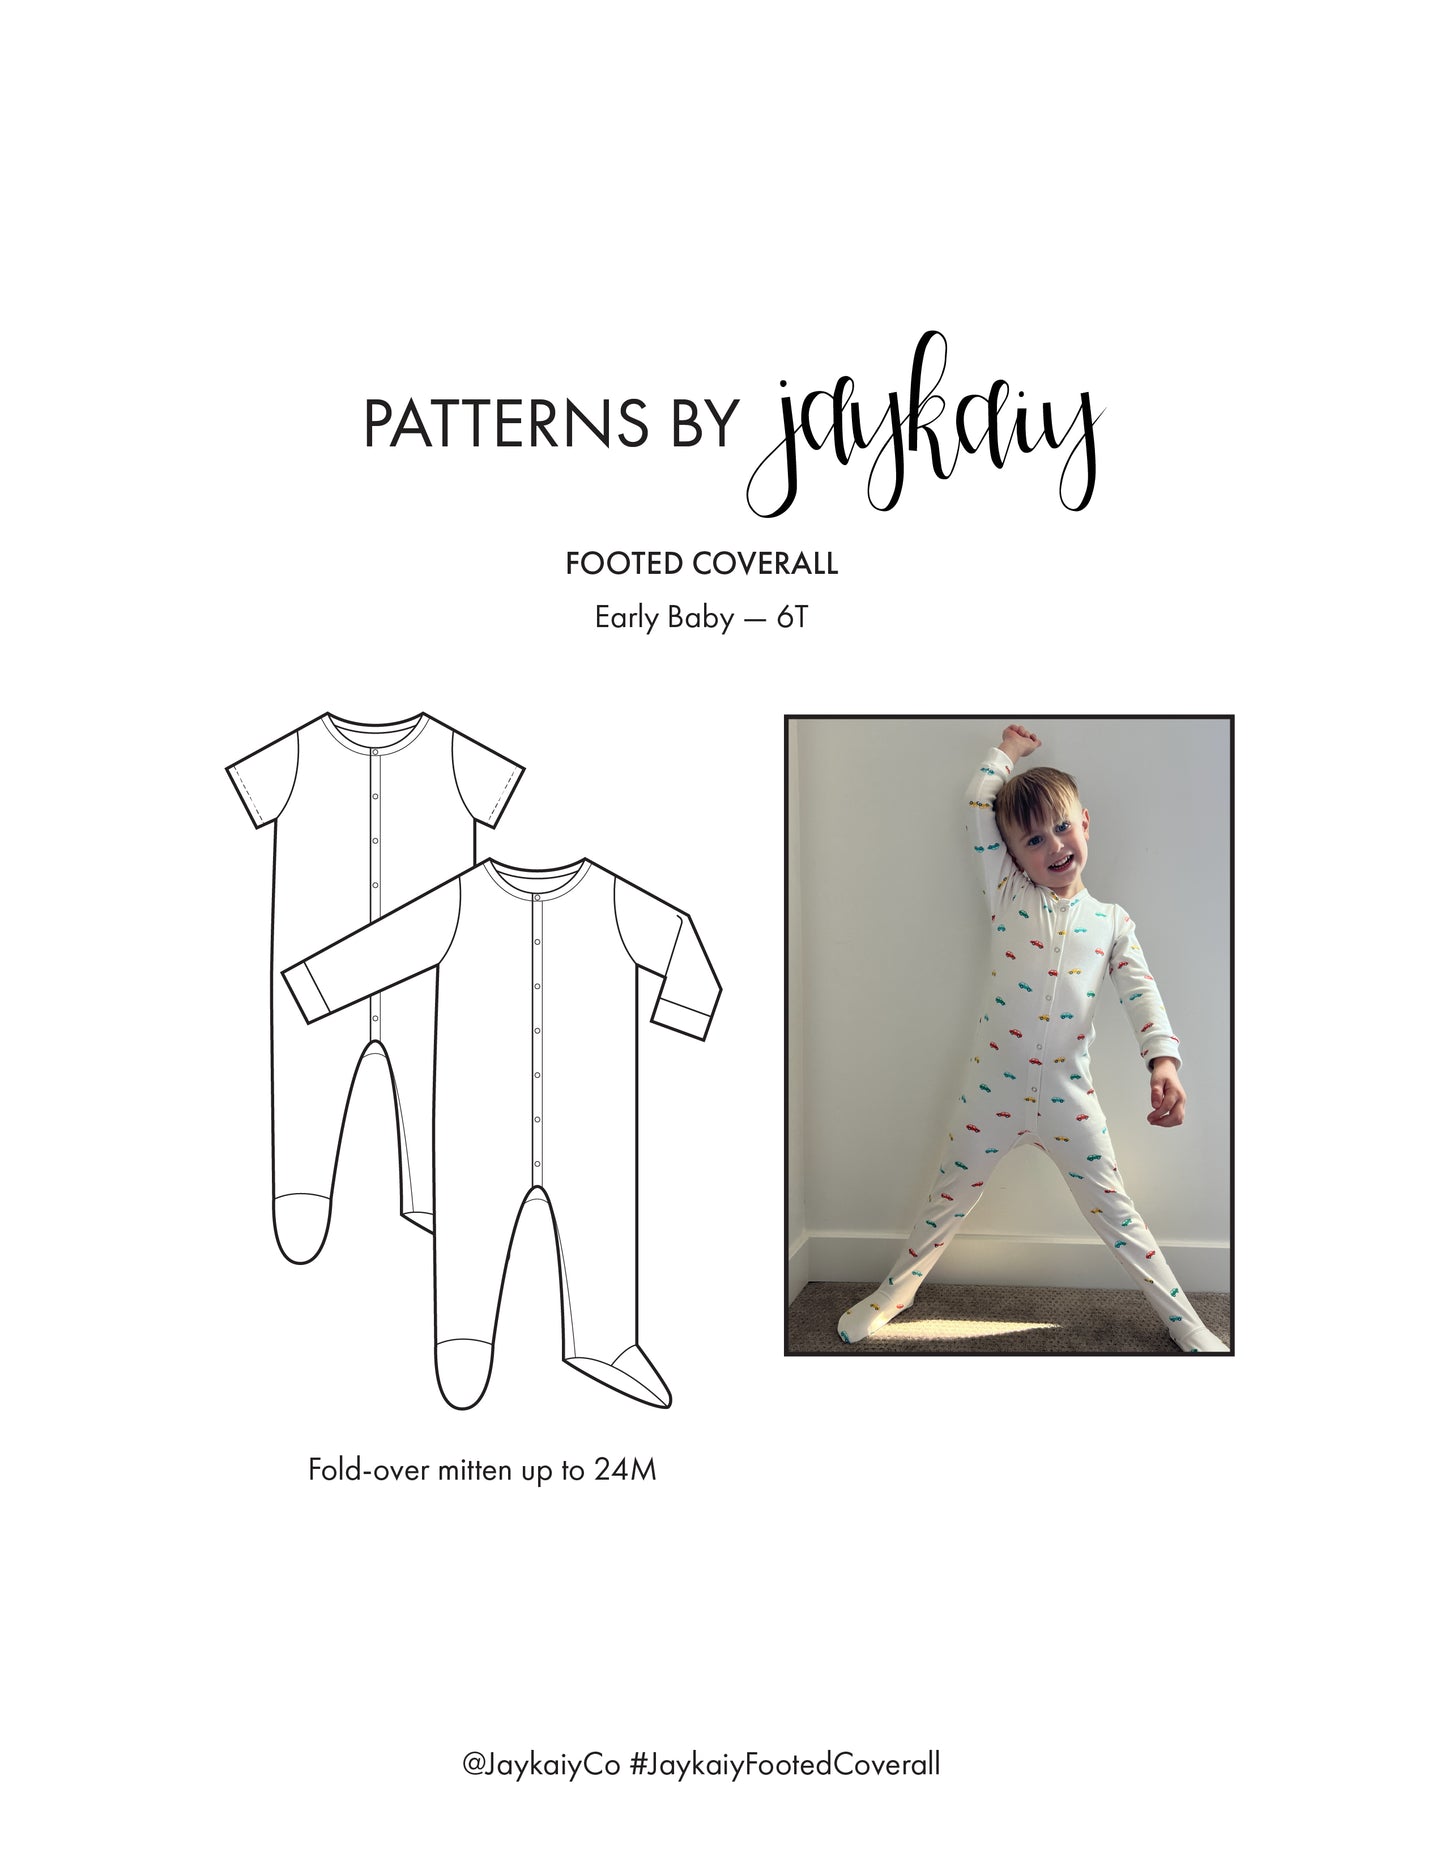 Footed Pajama Pattern 0-6 Years (with mittens for 0-24M)